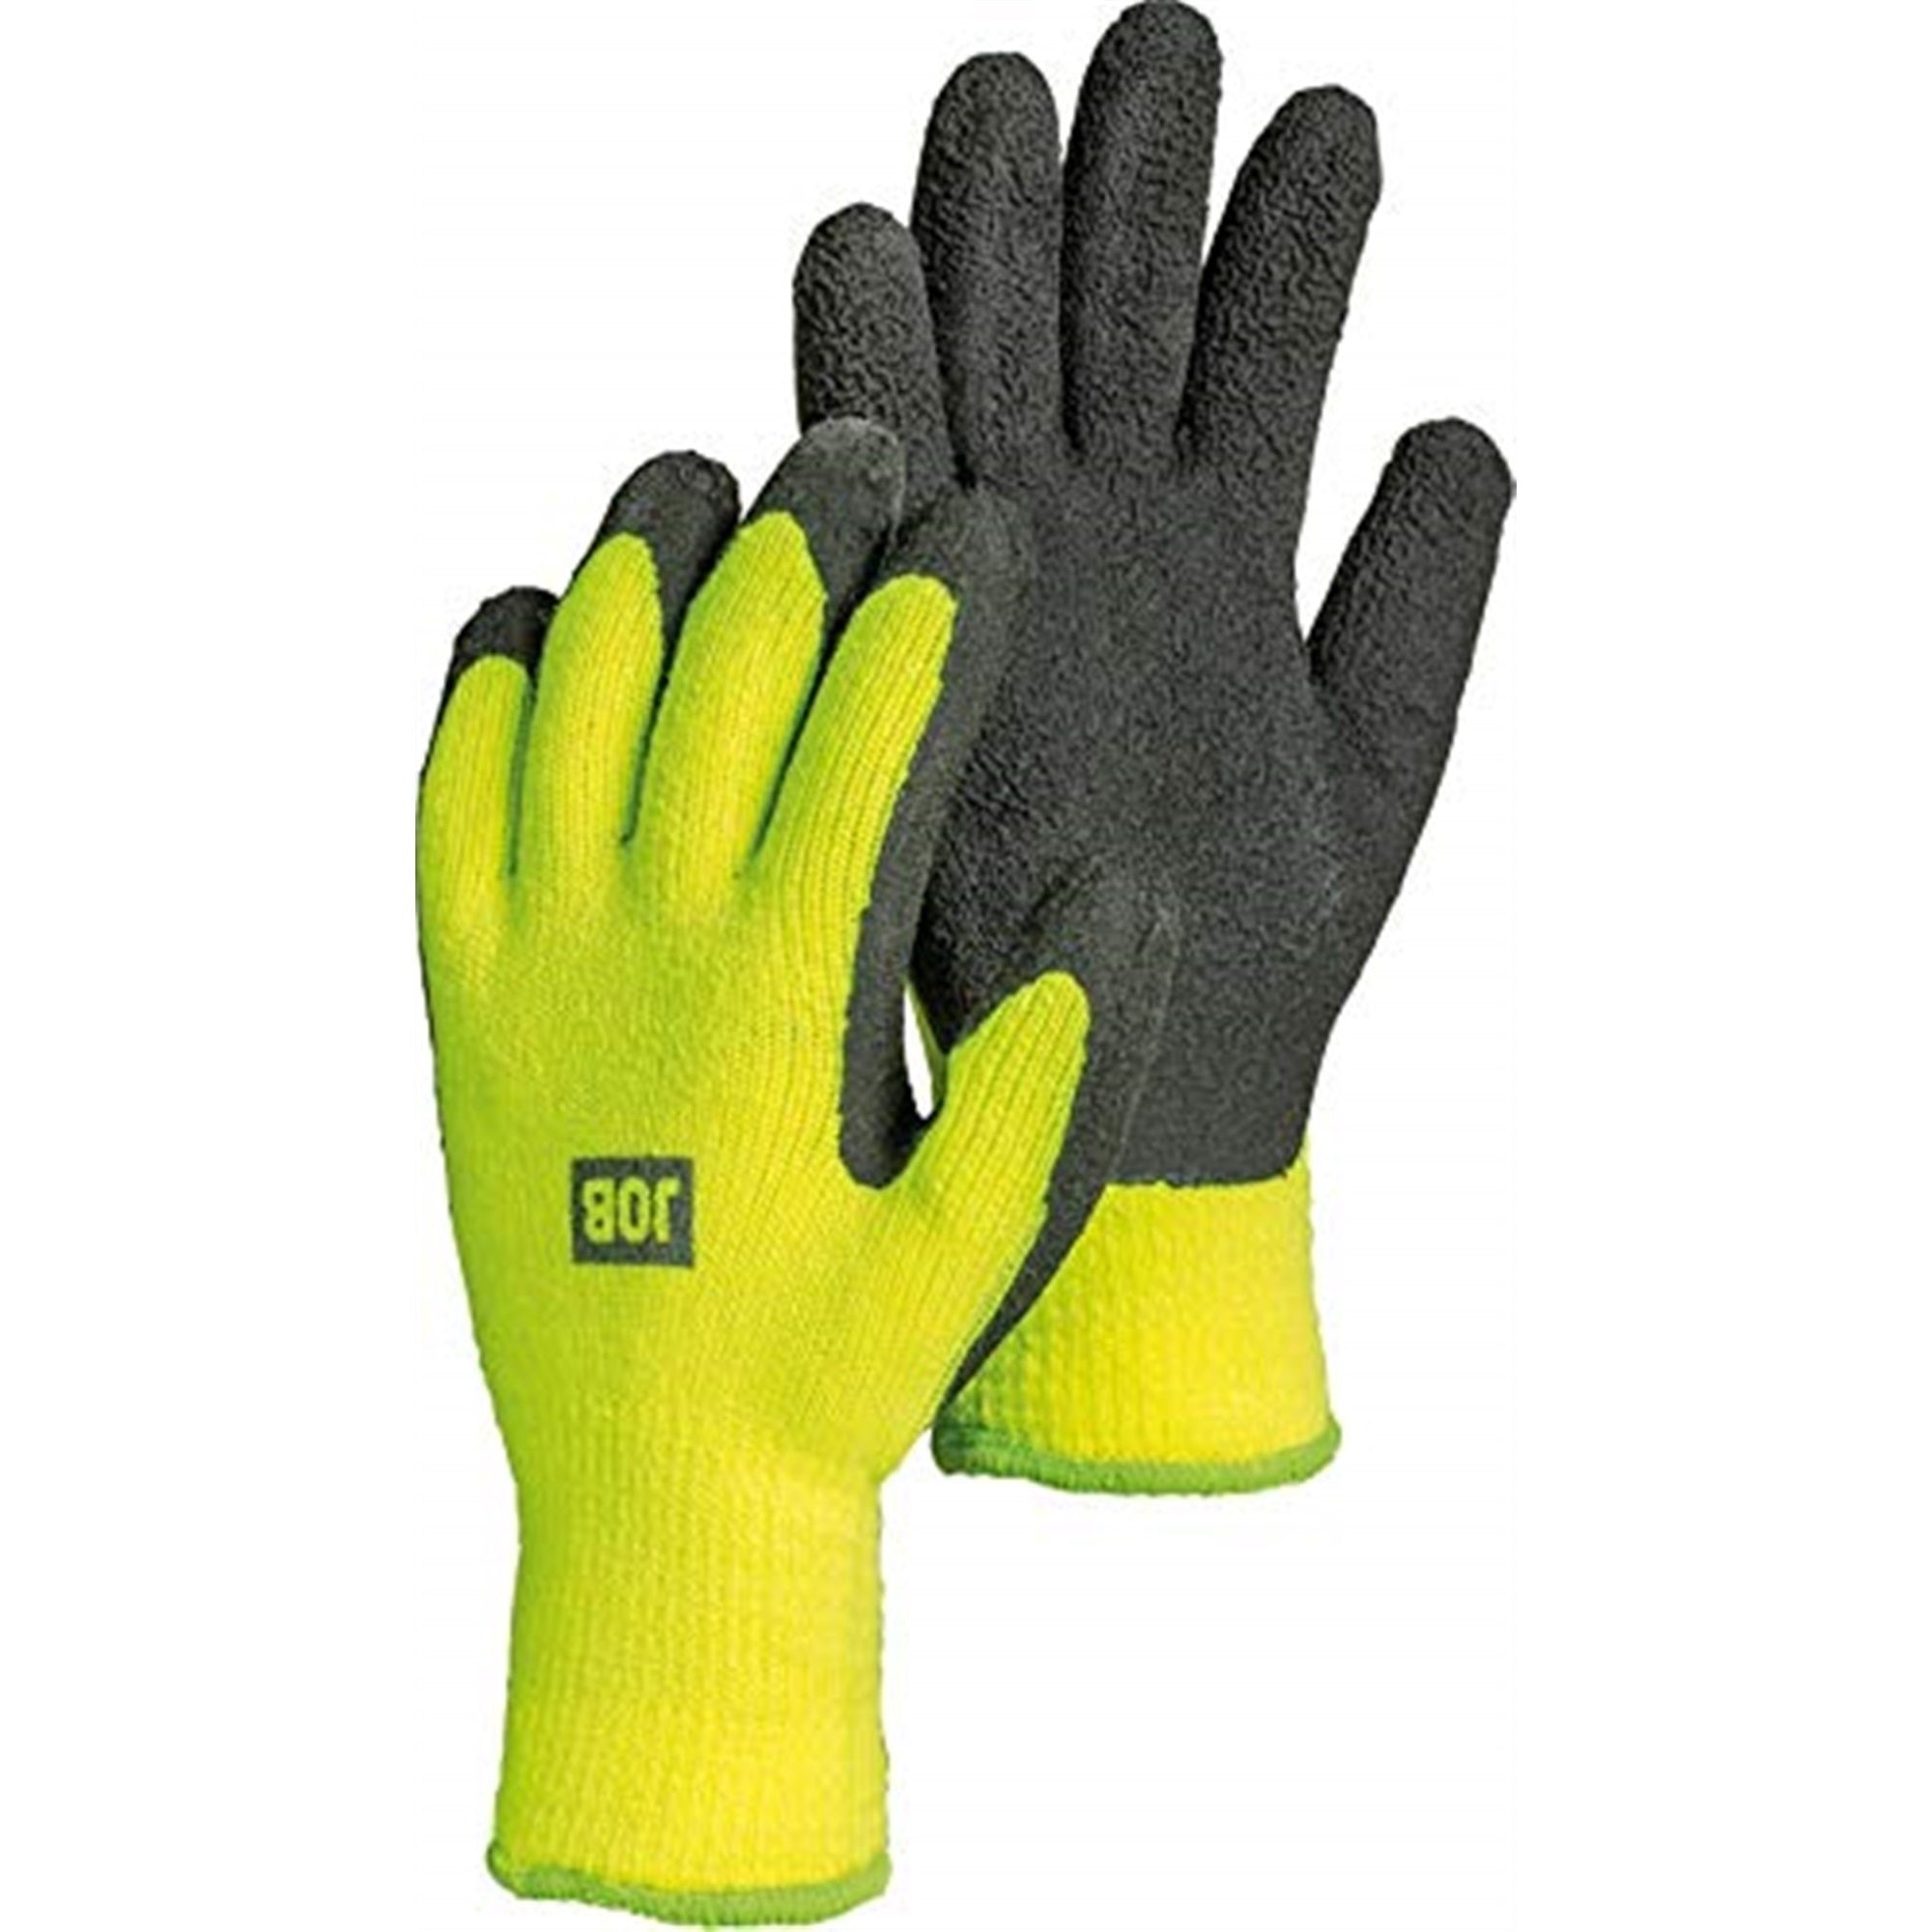 Hestra Asper Cold Weather Gloves, Landscaping, Material Handling, Rough Duty, 11